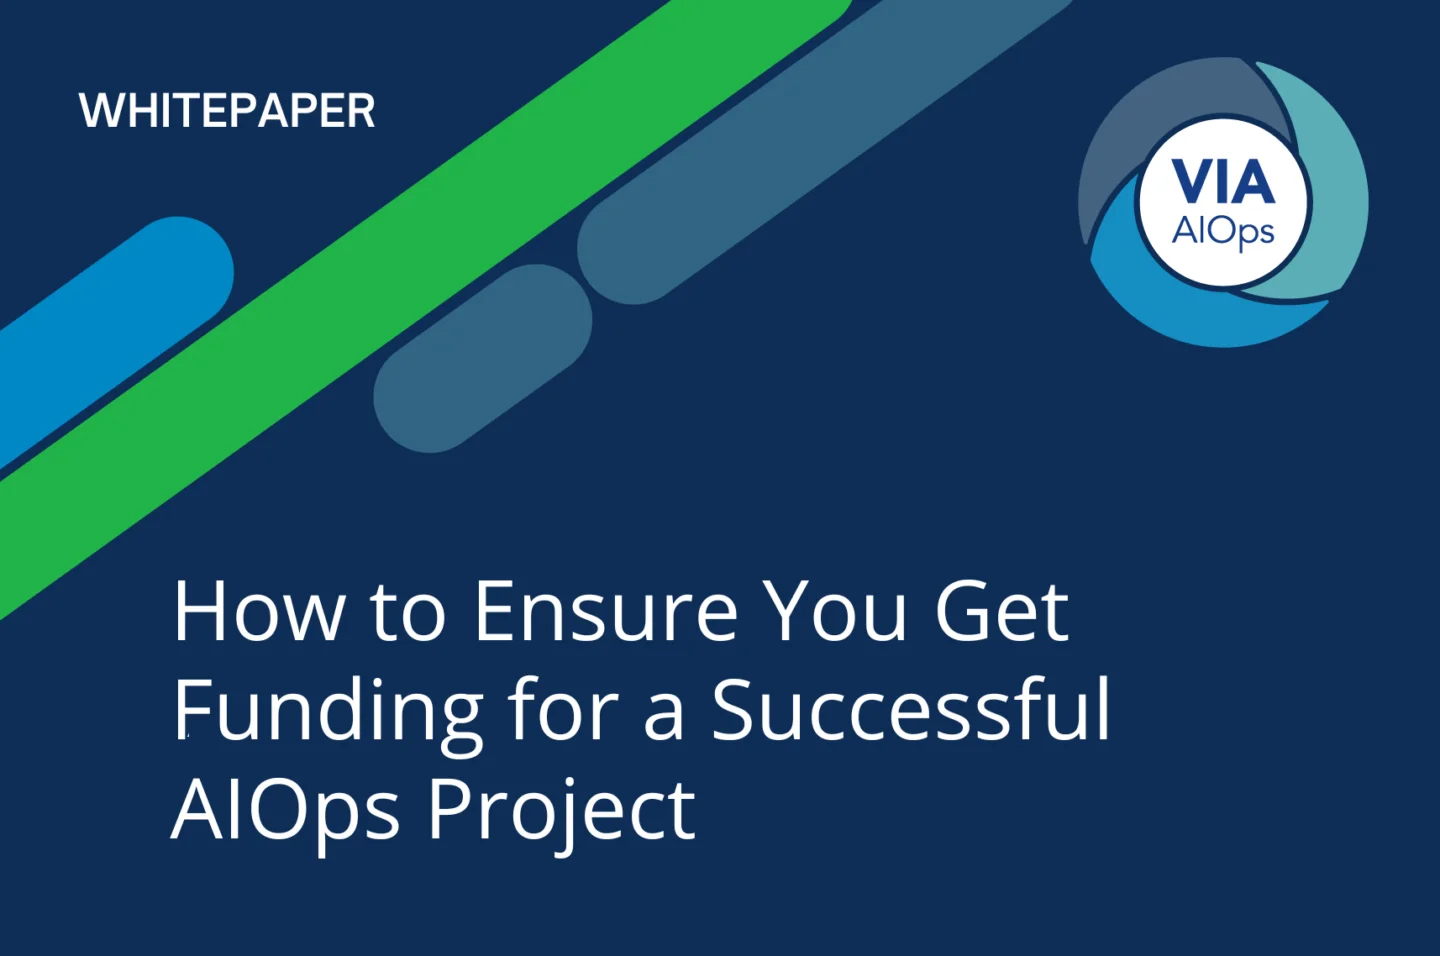 How to Ensure You Get Funding for a Successful AIOps Project